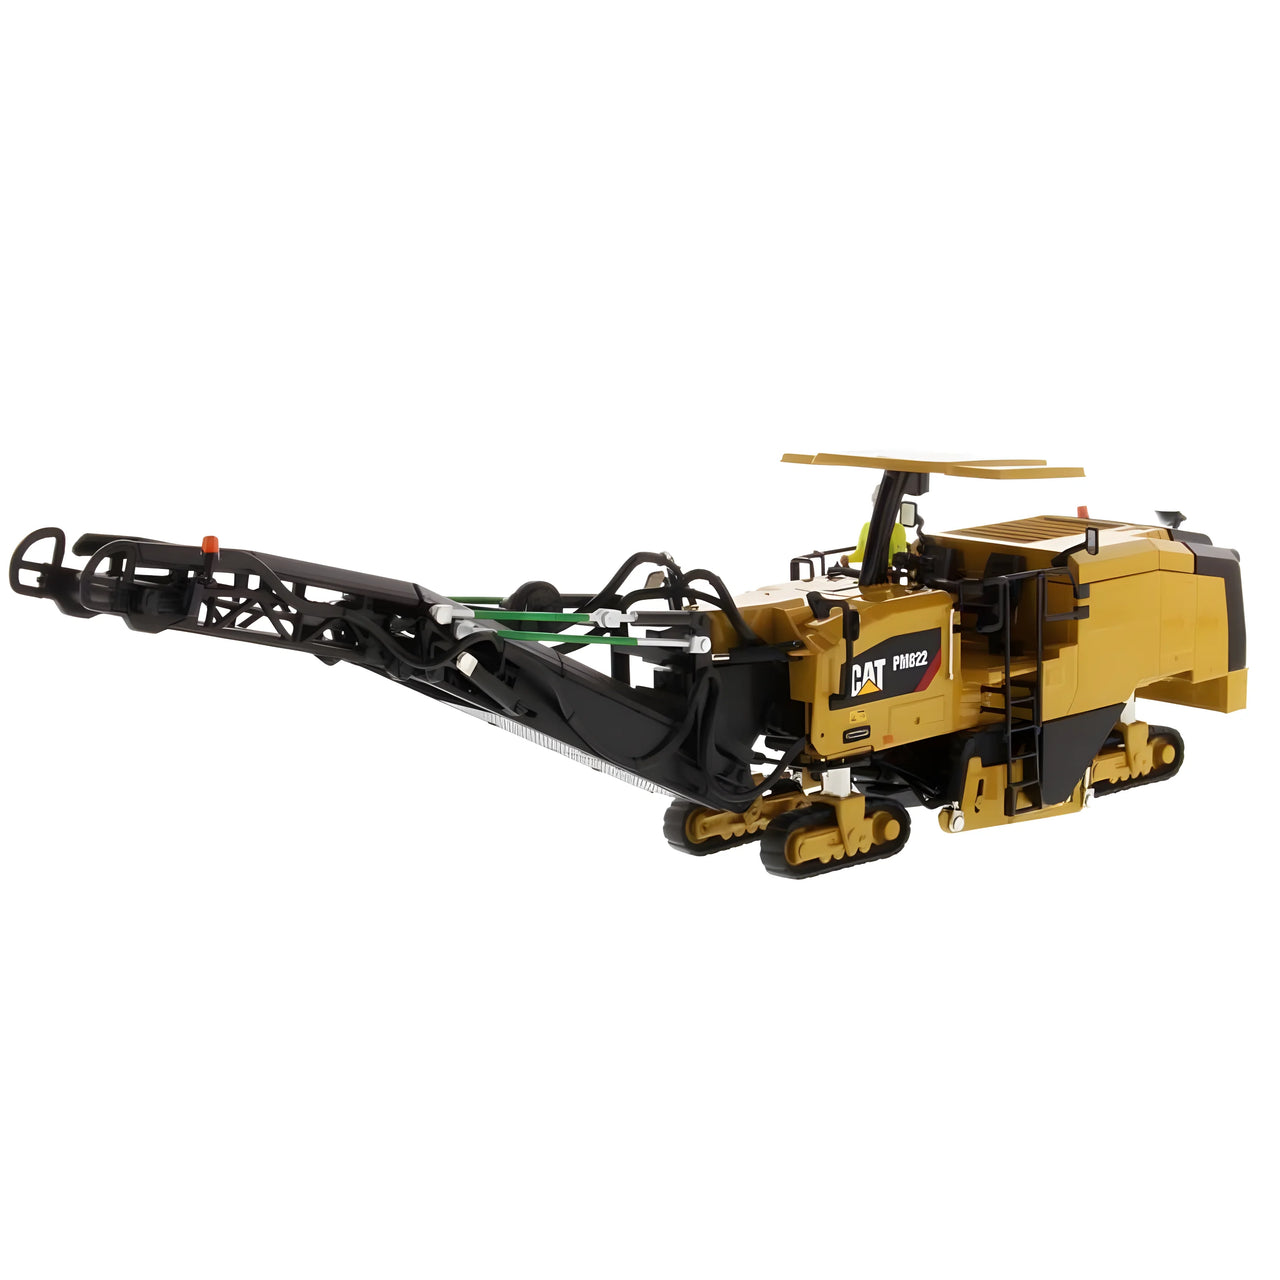 85588 Caterpillar PM822 Pavement Planer 1:50 Scale (Discontinued Model)